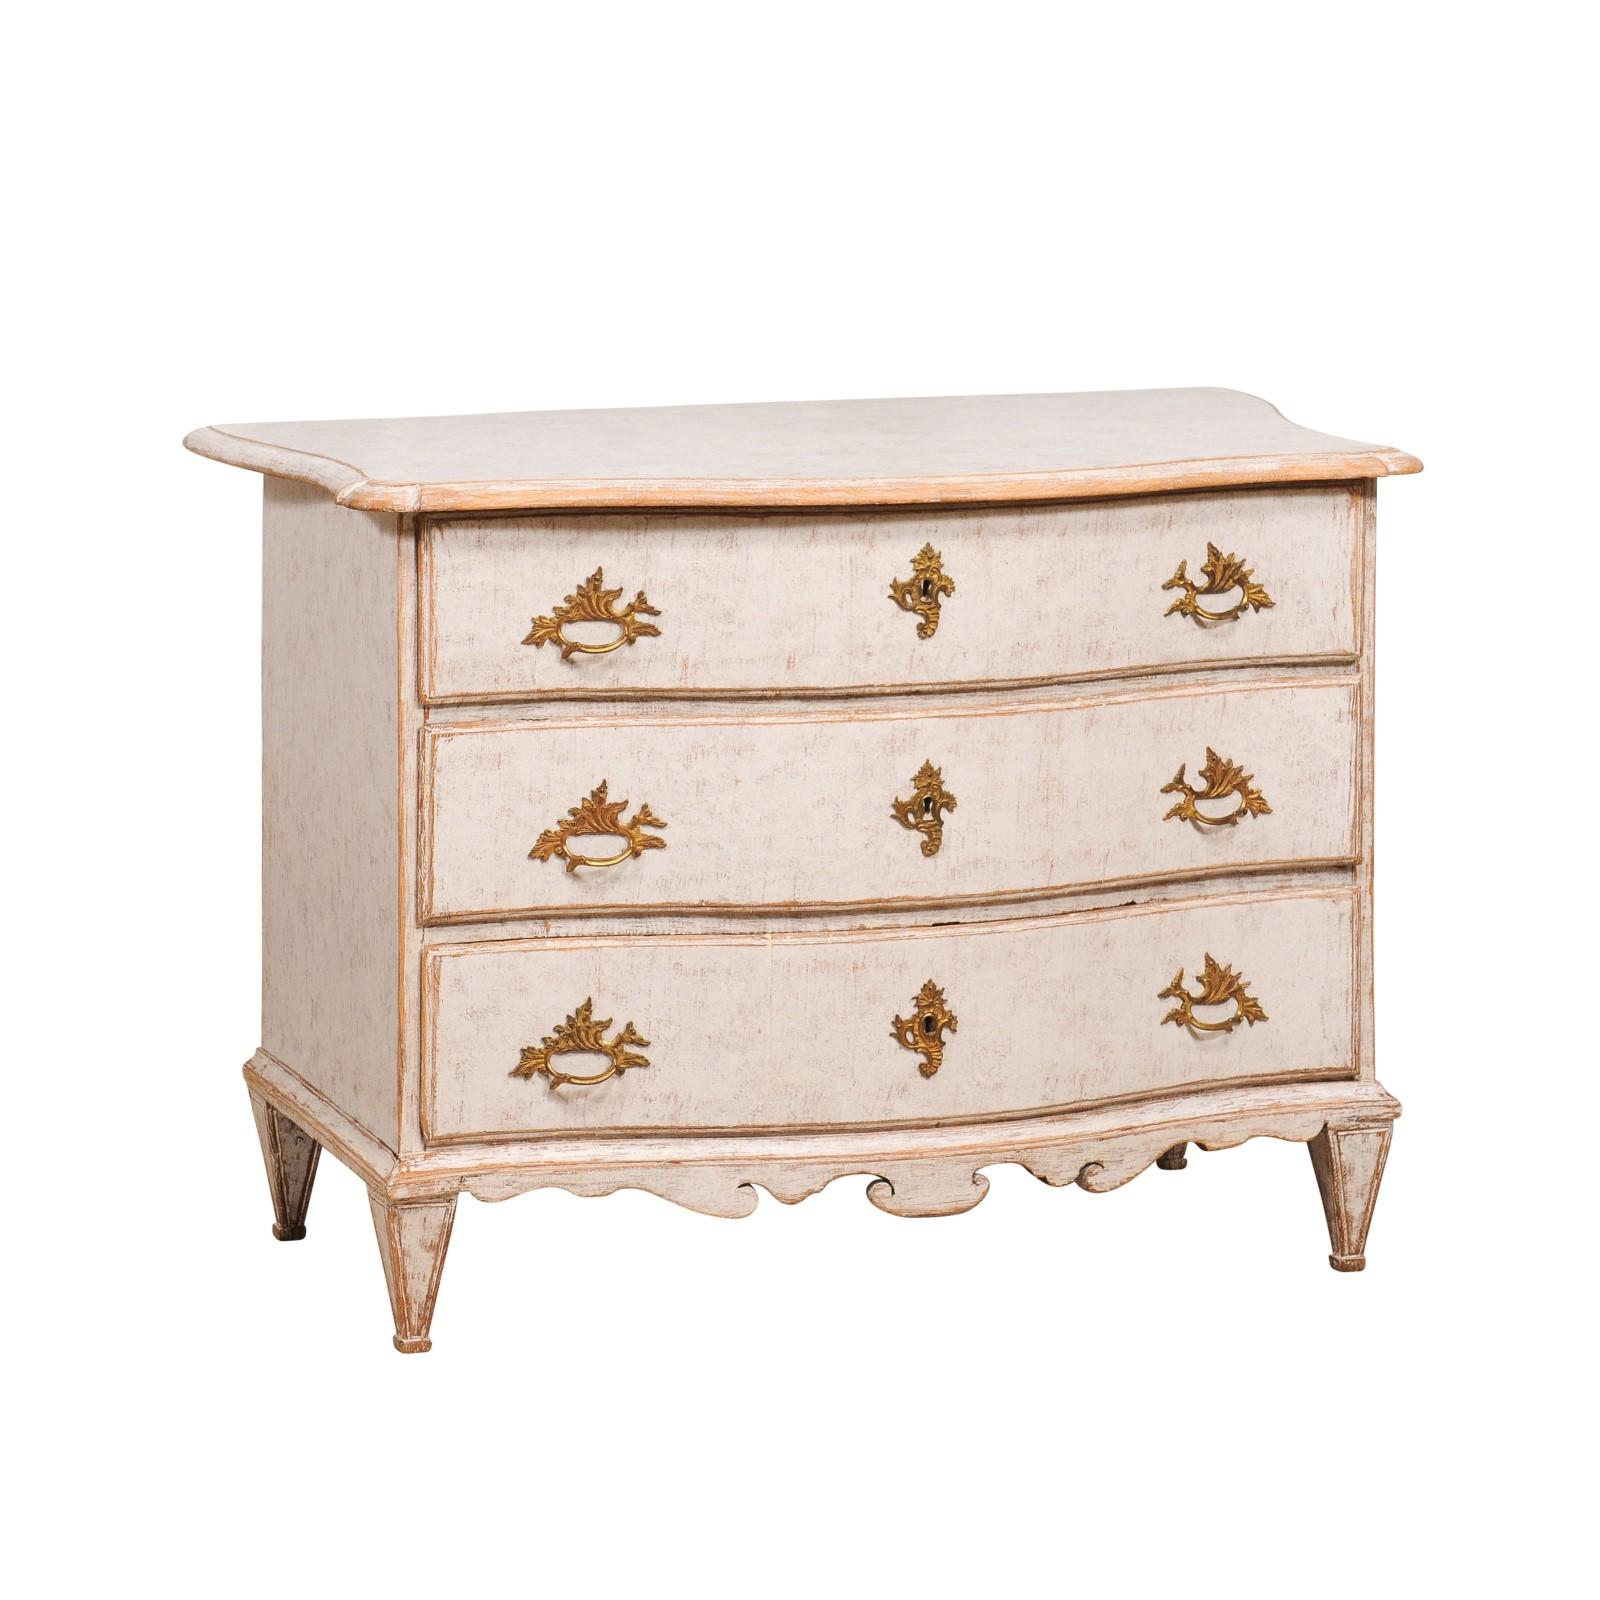 A Swedish Rococo period painted chest from circa 1760 with three drawers, ormolu hardware, light gray / cream painted finish, serpentine front and carved skirt. Emanating the poetic allure of the Rococo era, this Swedish chest from circa 1760 is an